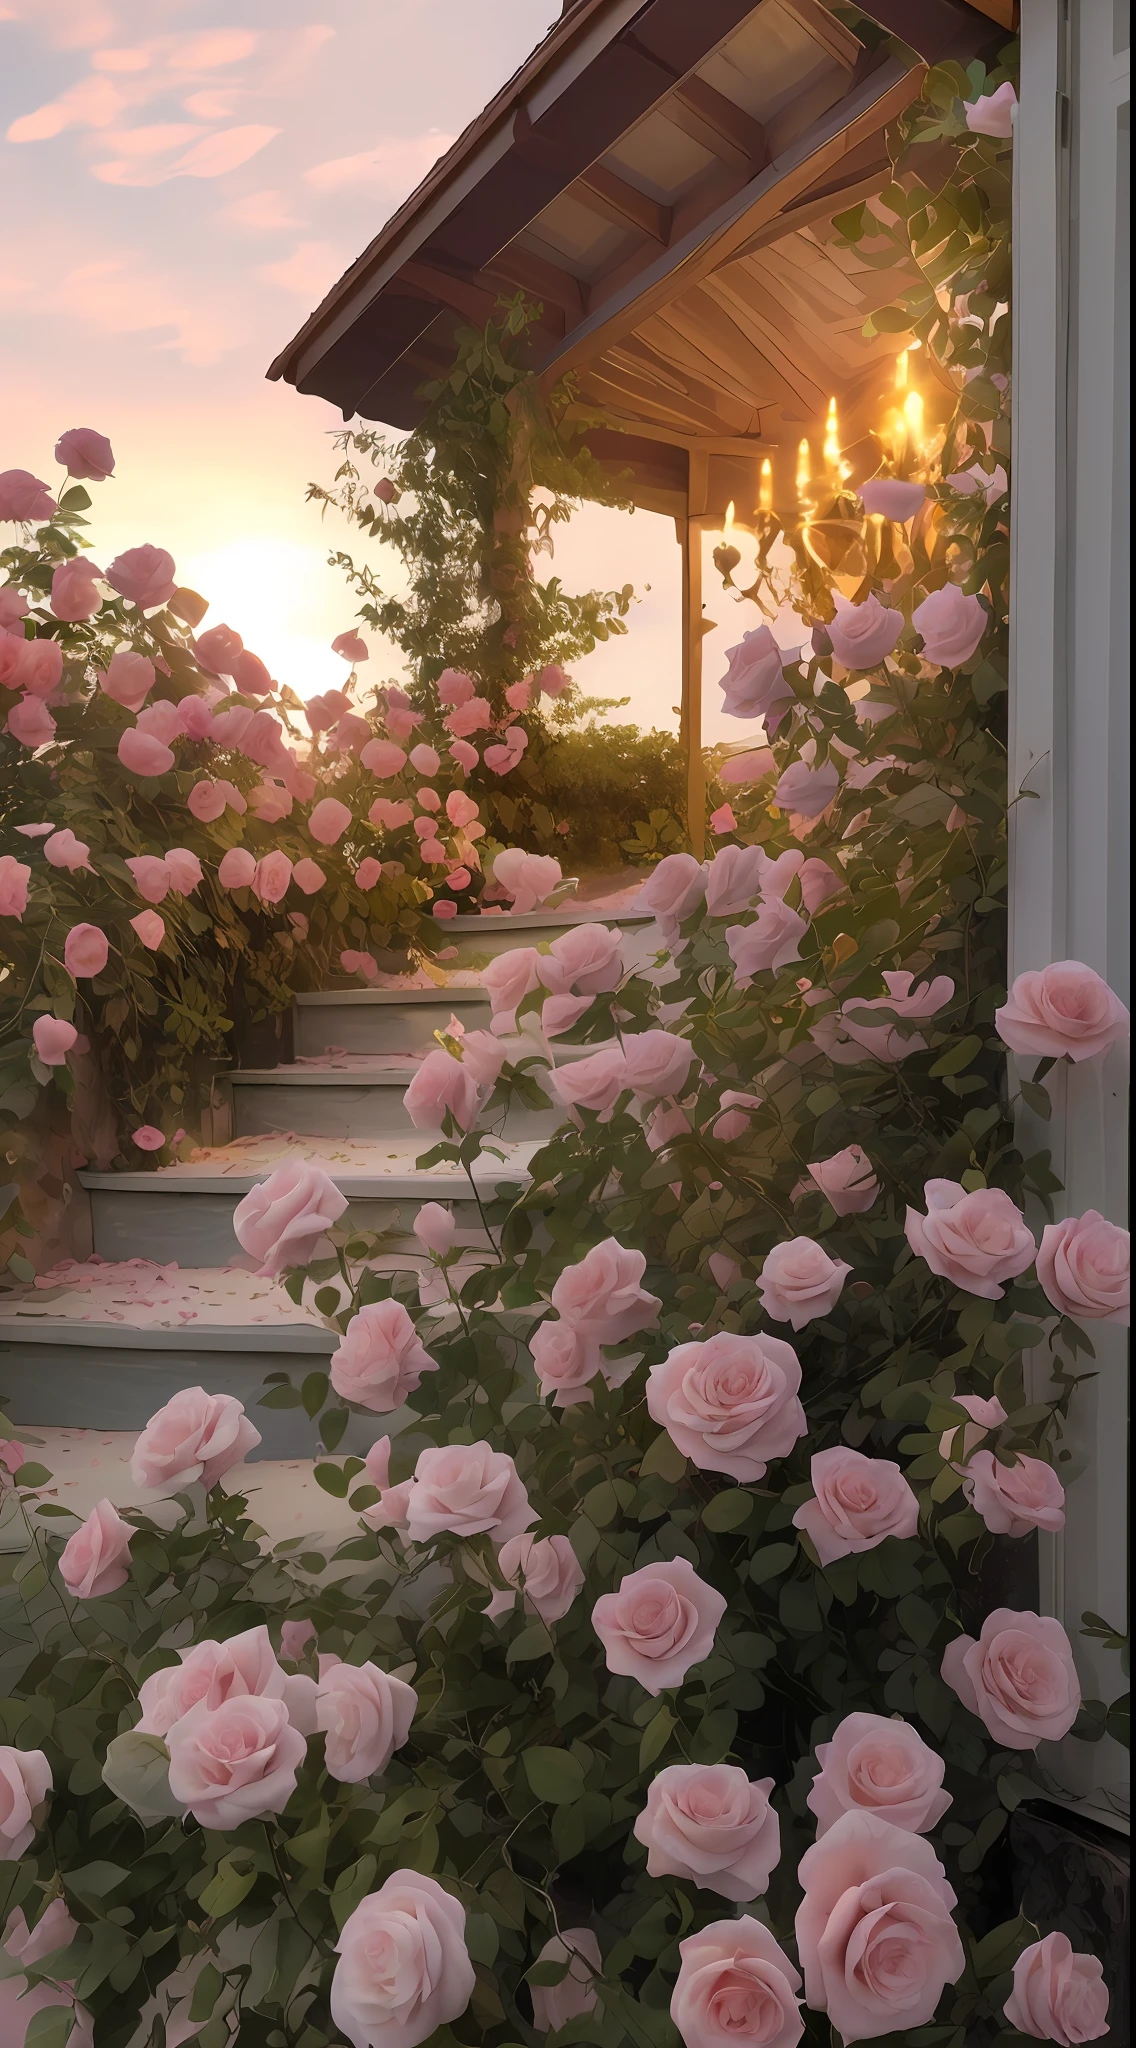 A bush of pink roses outside the house, beautiful and aesthetic, soft pink, beautiful aesthetic, roses in movie lights, lush flowers outdoors, nature and floral aesthetics, rose garden, roses, portal made of roses, beautiful images, roses, fantastic aesthetics, in a cottage core garden, pink golden hour, (masterpiece:1.6, best quality), (fine detailed beautiful eyes: 1.2), (extremely detailed CG unity 8k wallpaper, masterpiece , super detailed, best shadows), (detailed background), high contrast, (best lighting, extremely delicate and beautiful), ((color paint splatter on transparent background, Dulux,)), ((caustics) ), dynamic angles, beautiful detail glow,